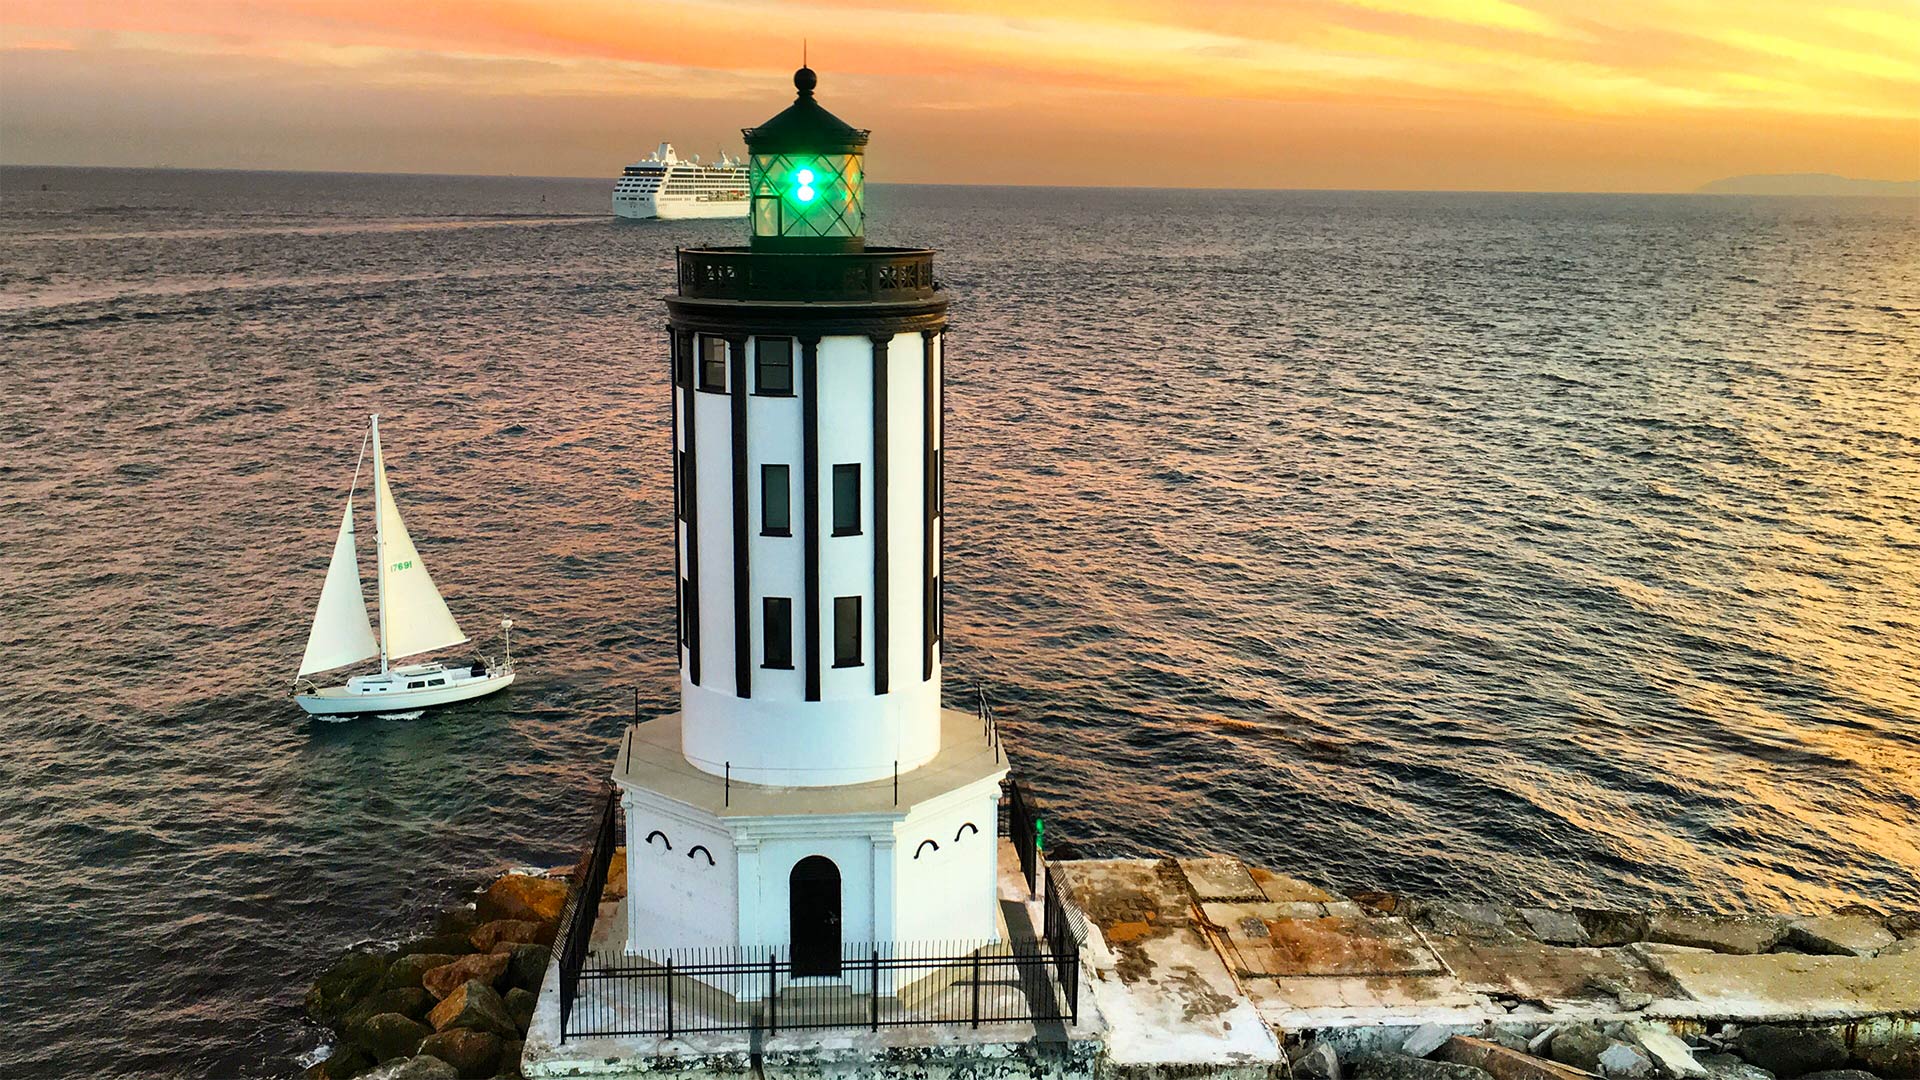 Angel's Gate Lighthouse in San Pedro harbor. Photo taken at sunset by Celebrity Helicopter Tours.